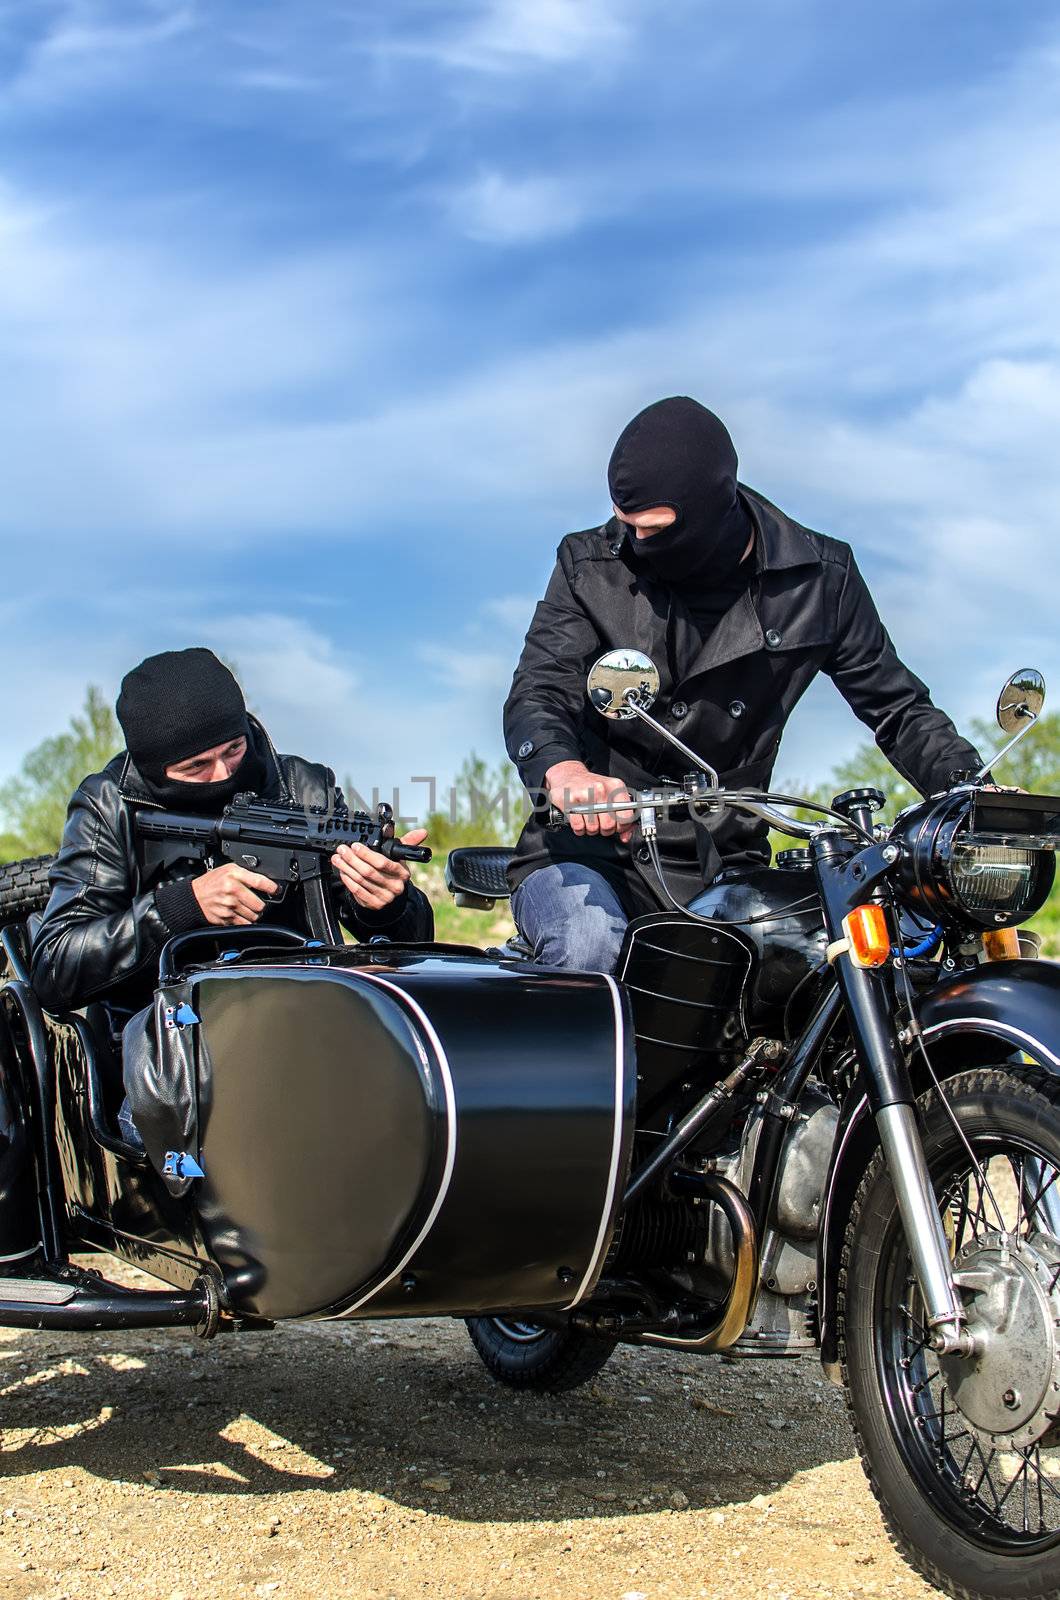 Two armed men riding a motorcycle with a sidecar